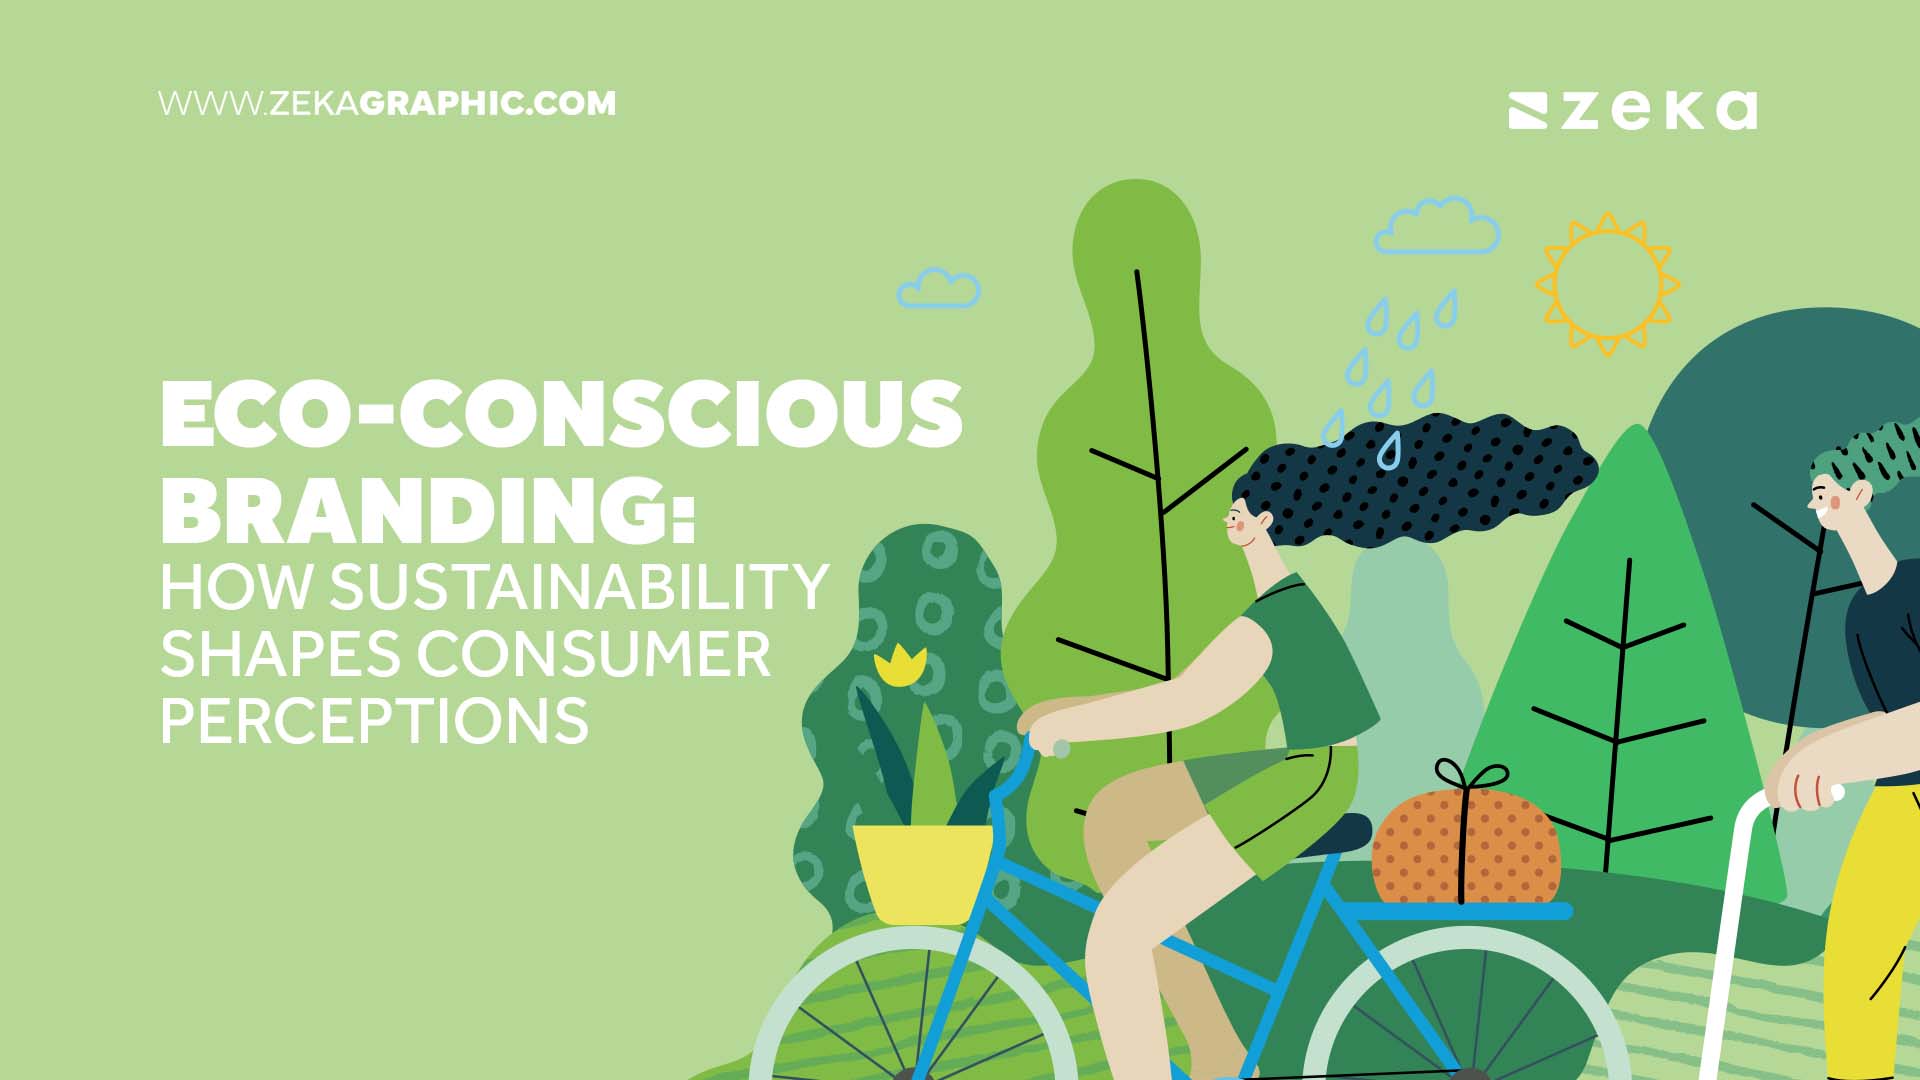 Eco-Conscious Branding: How Sustainability Shapes Consumer